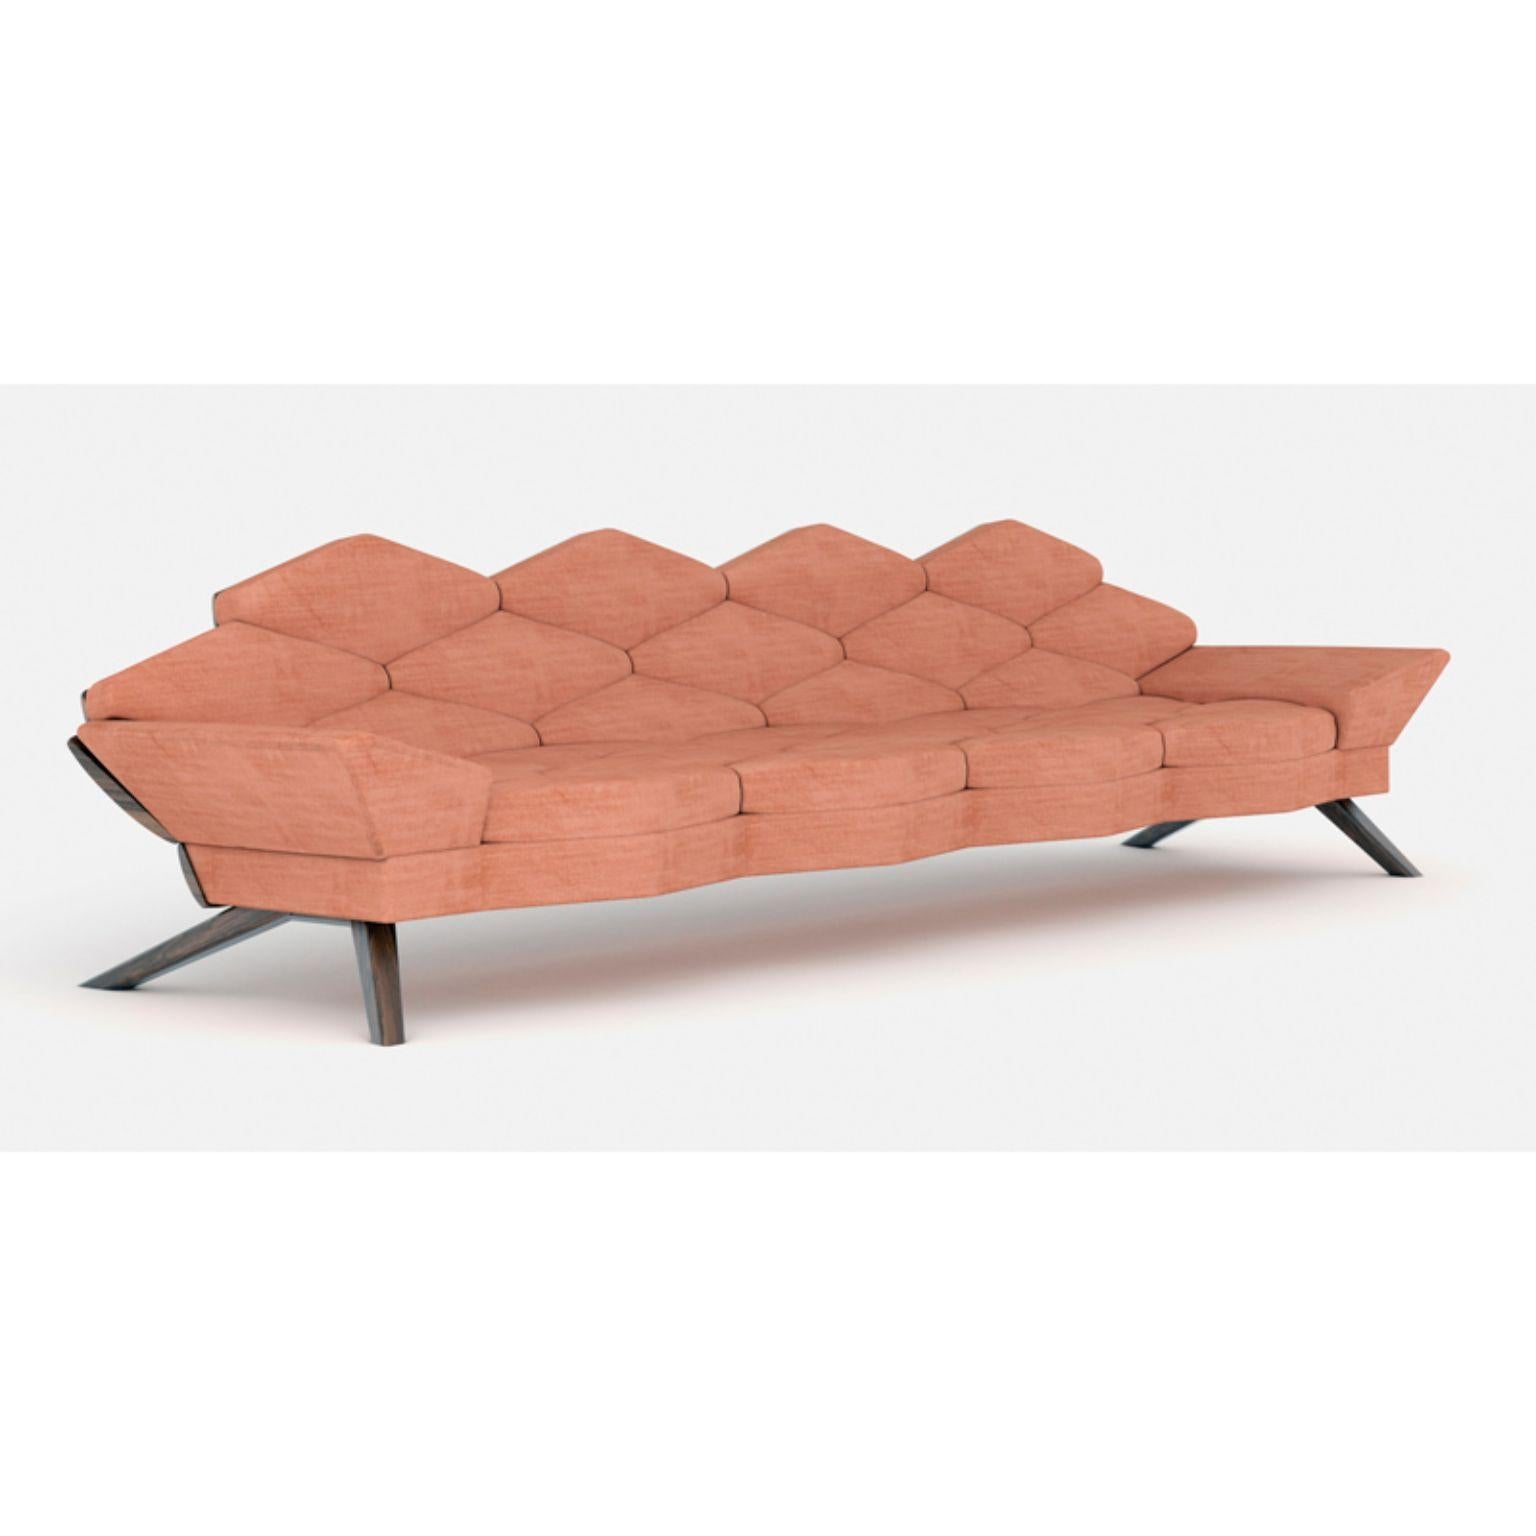 Hive sofa by Alexandre Caldas
Dimensions: W 300 x D 87 x H 82 cm
Materials: Solid walnut wood, fabric

Materials available in ash, mutene, walnut
Seat available in fabric, leather, corkfabric
Sound system integrated with Bluetooth technology